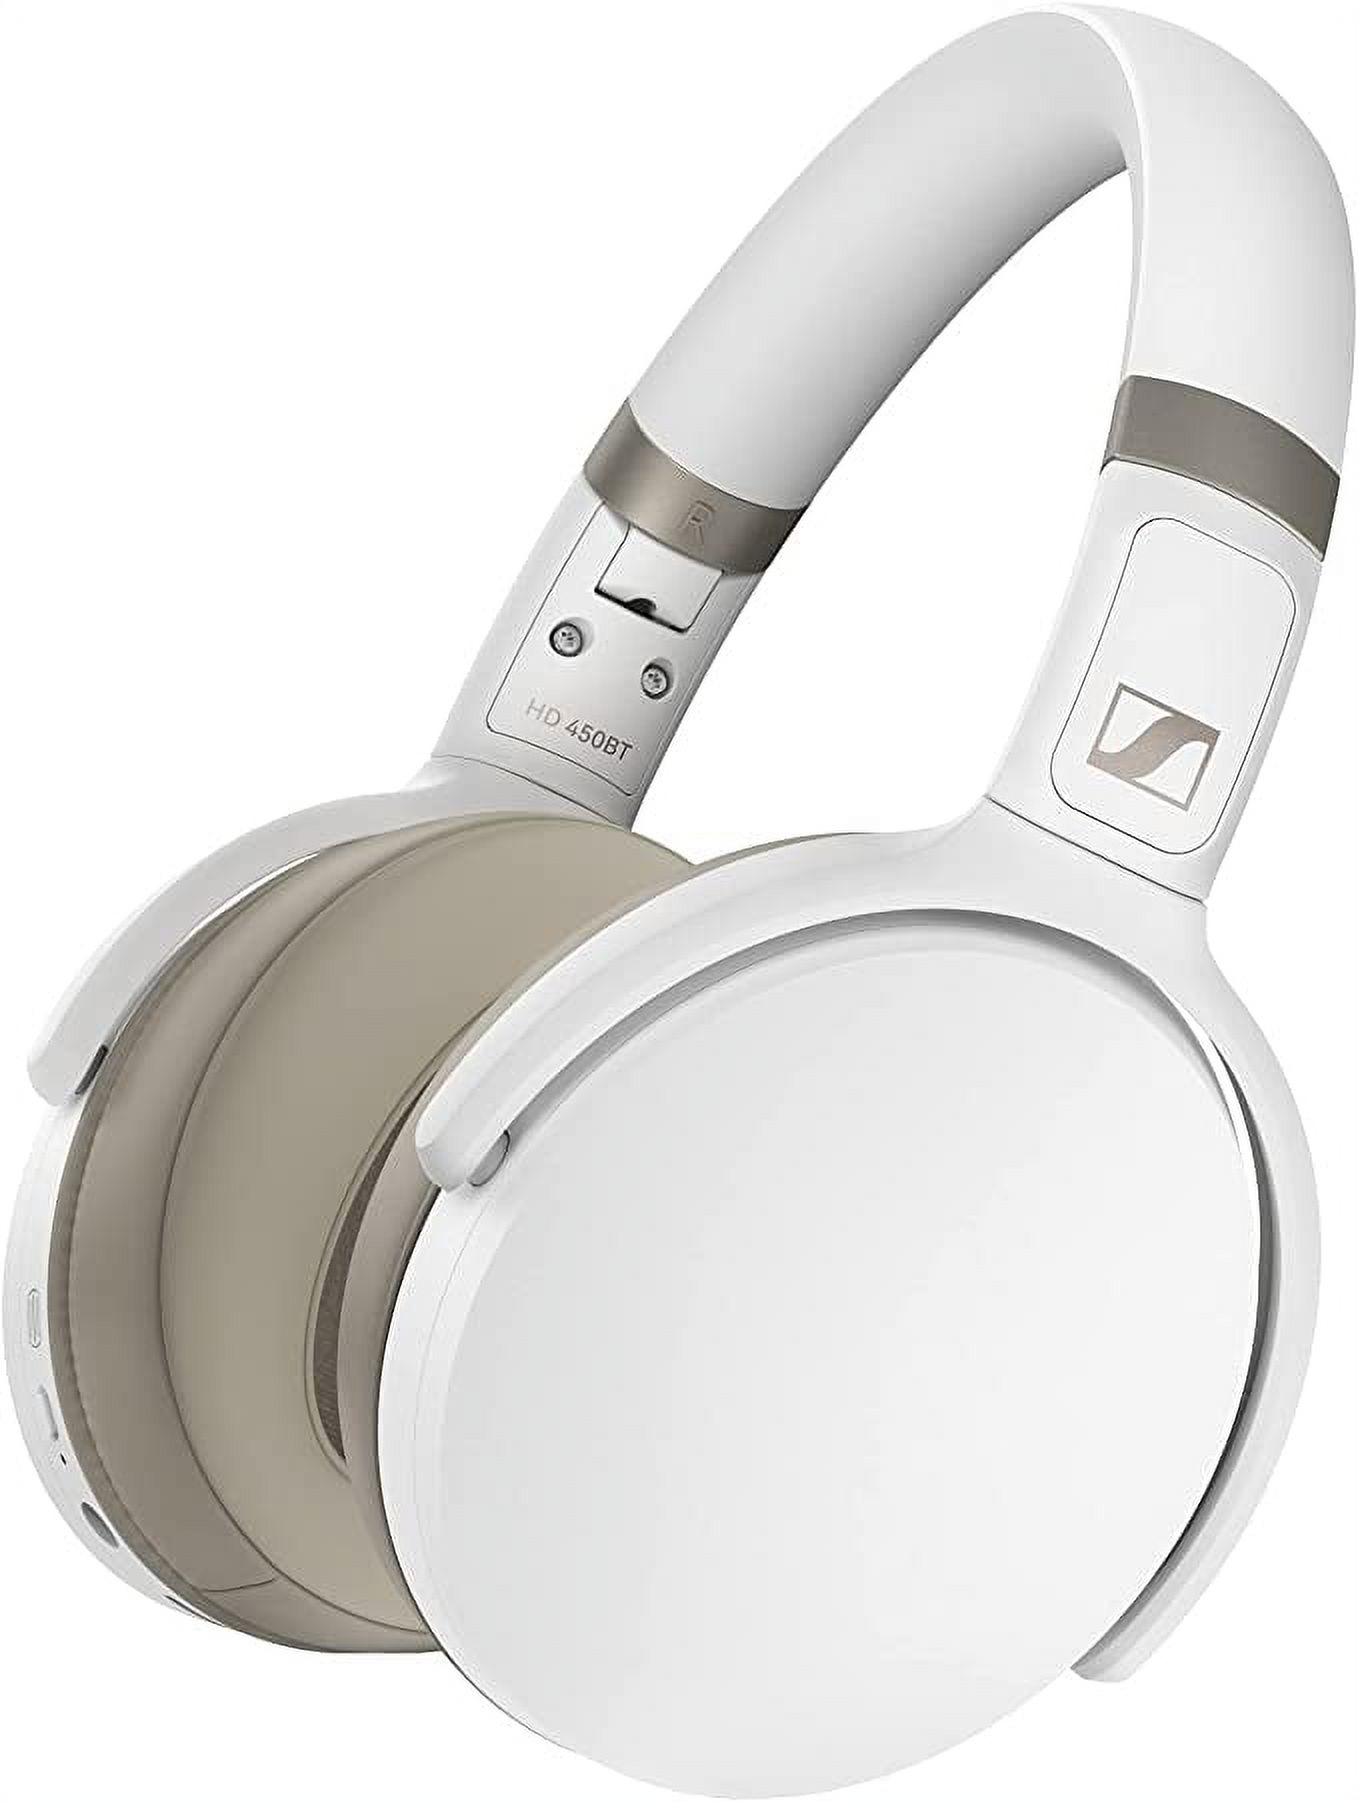 SENNHEISER HD 450BT Bluetooth 5.0 Wireless Headphone with Active Noise Cancellation - 30-Hour Battery Life, USB-C Fast Charging, Virtual Assistant Button, Foldable - White - image 1 of 6